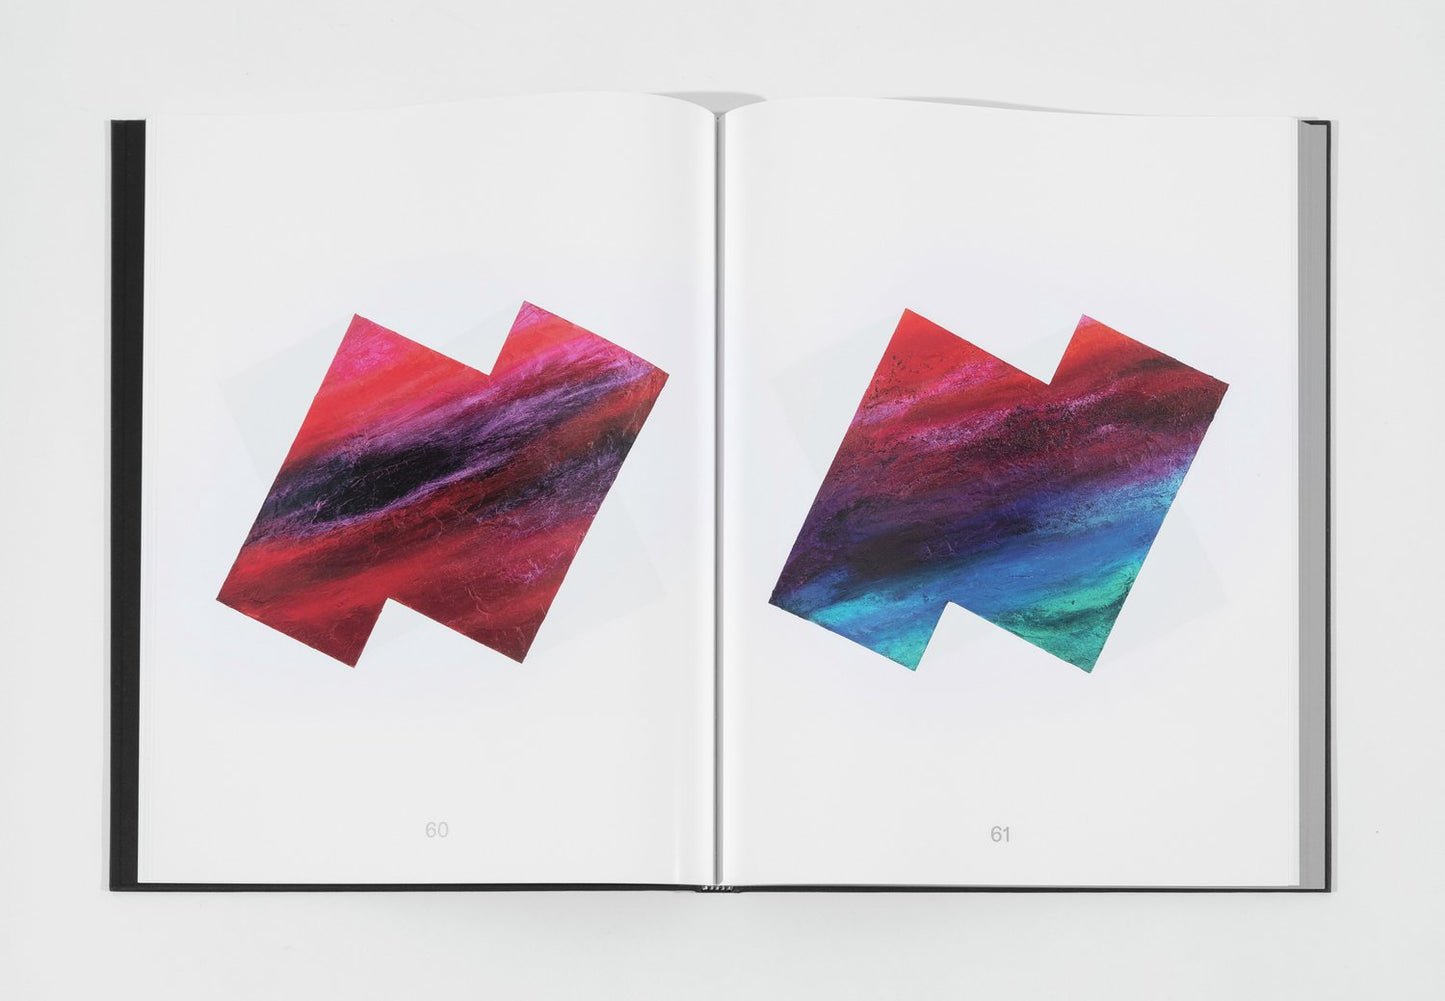 Page of ombre artworks, both are the same shape on either side of the page. The colors range from red and purple to indigo and teal.